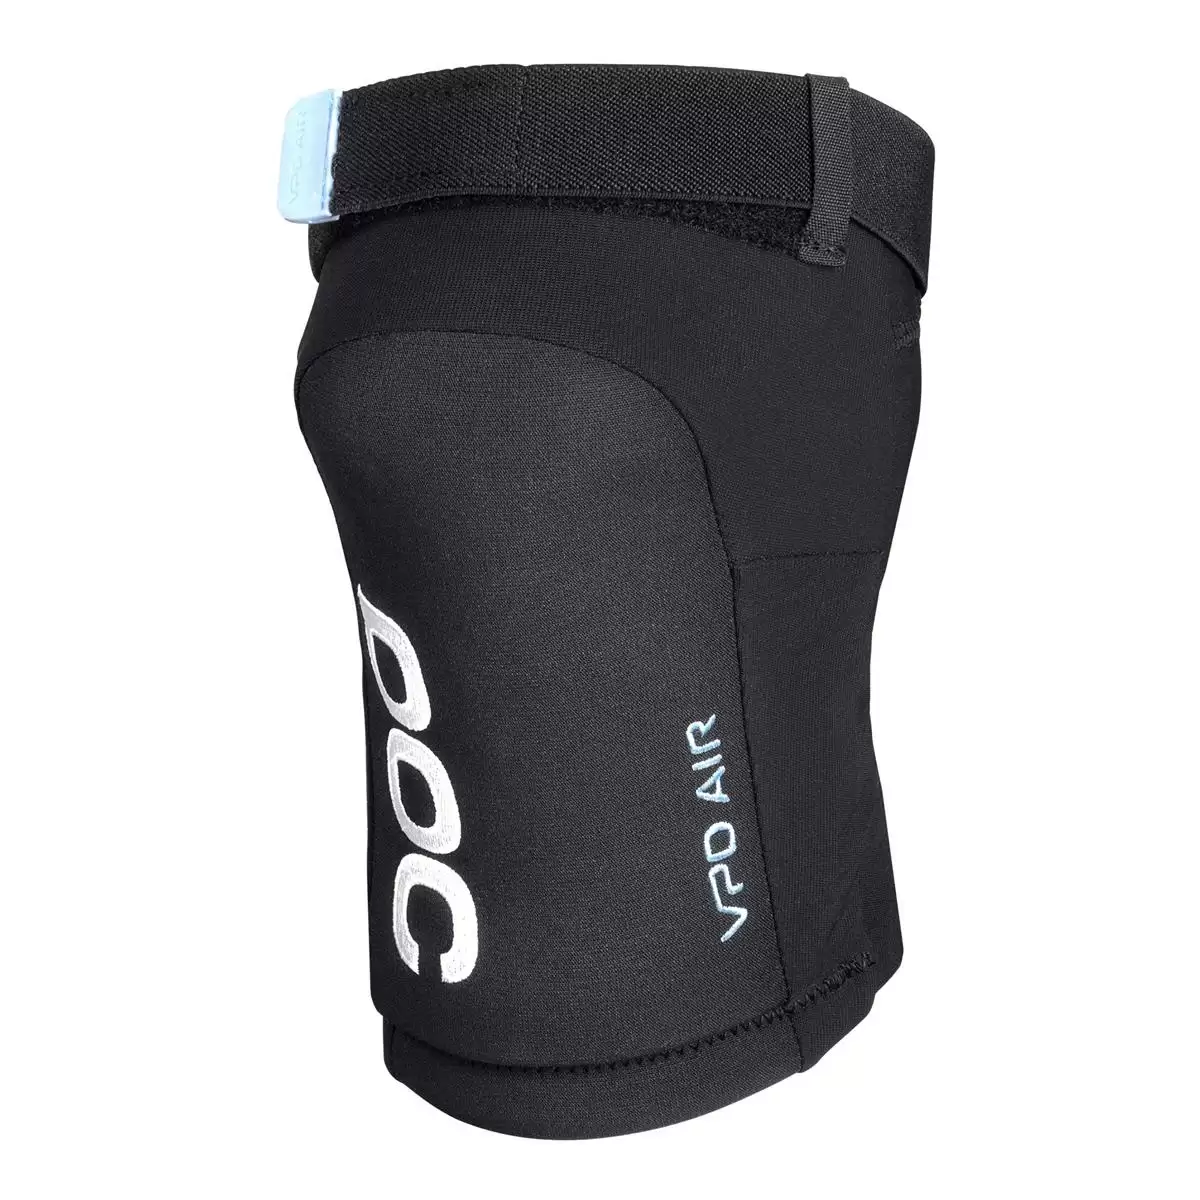 Joint VPD Air Knee pads black Size XL #1